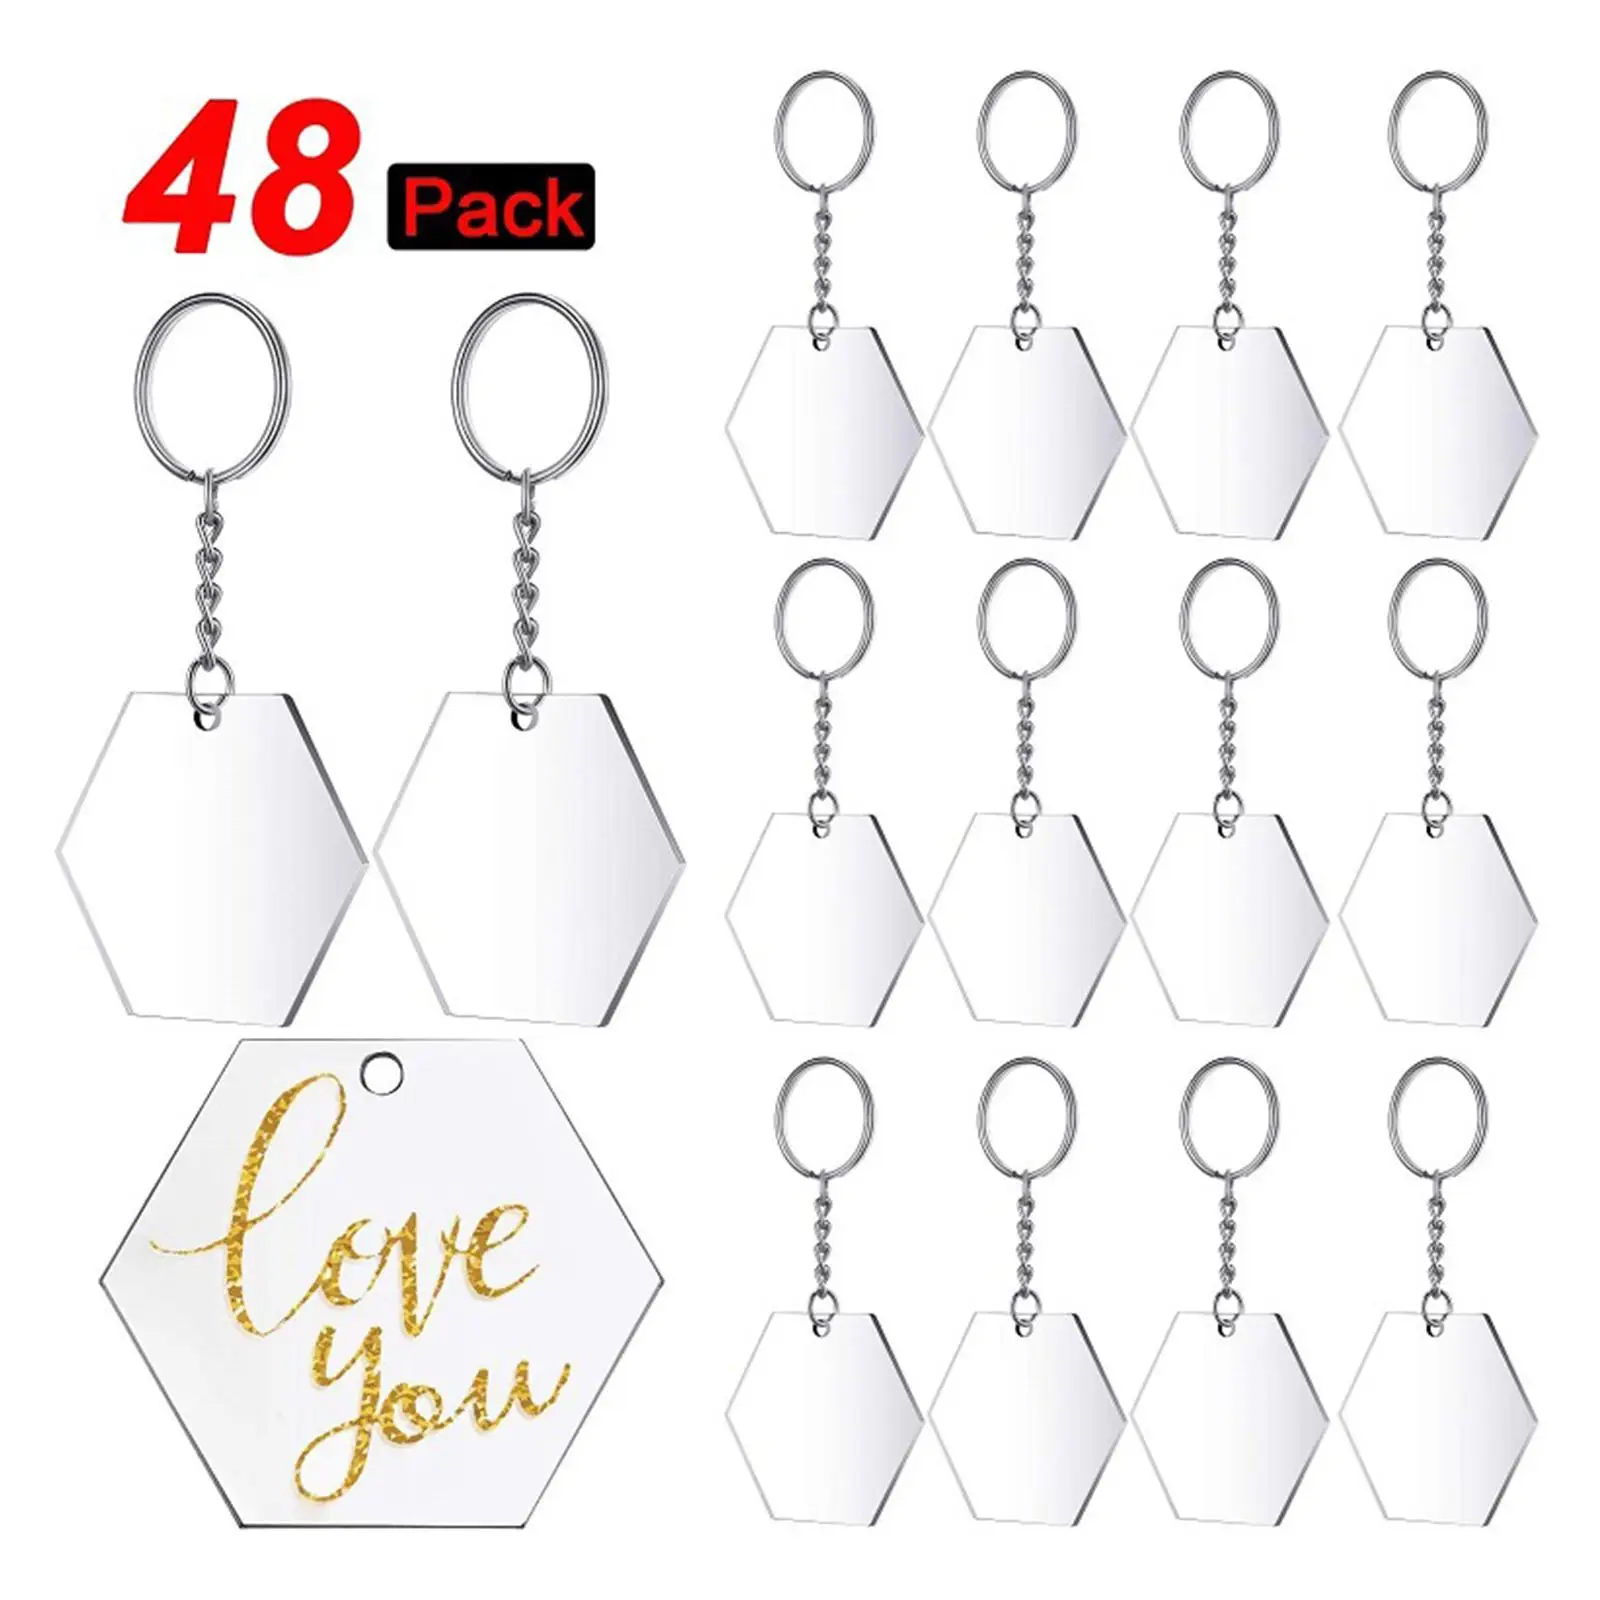 24 Sets Acrylic Keychain , Transparent Hexagon Pendant Chains and Keychain Pendant for DIY Key Rings